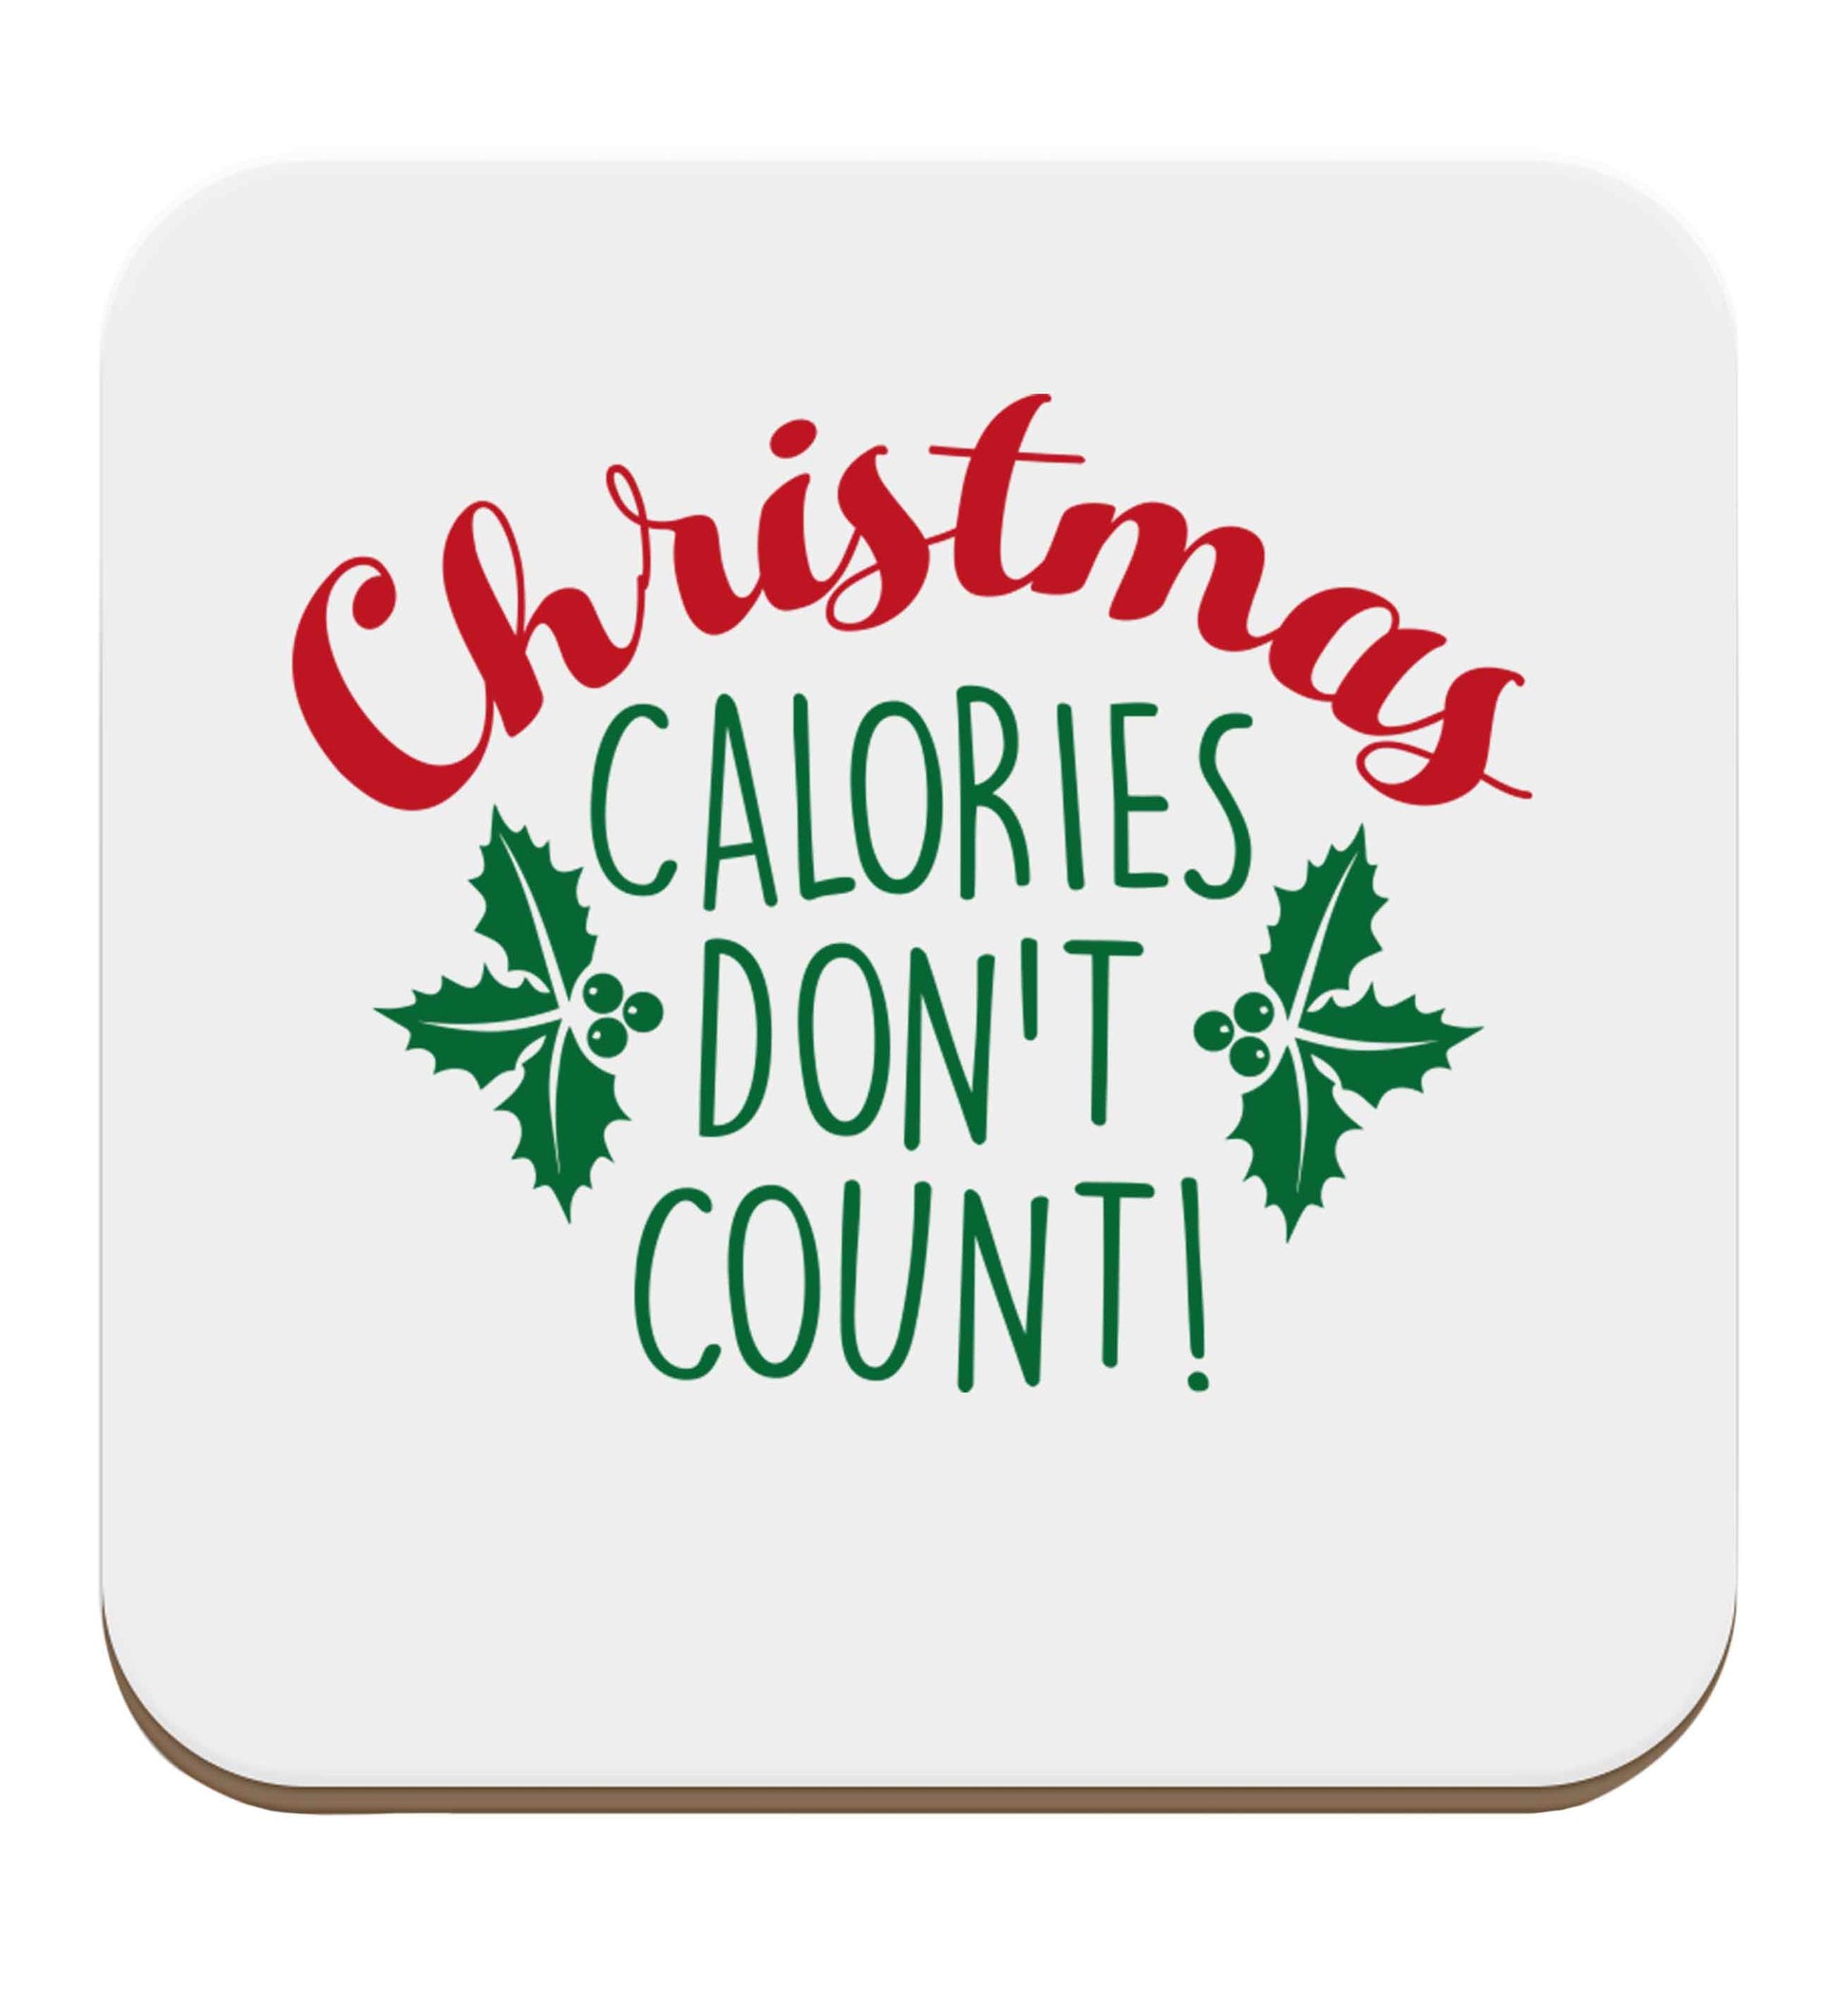 Christmas calories don't count set of four coasters